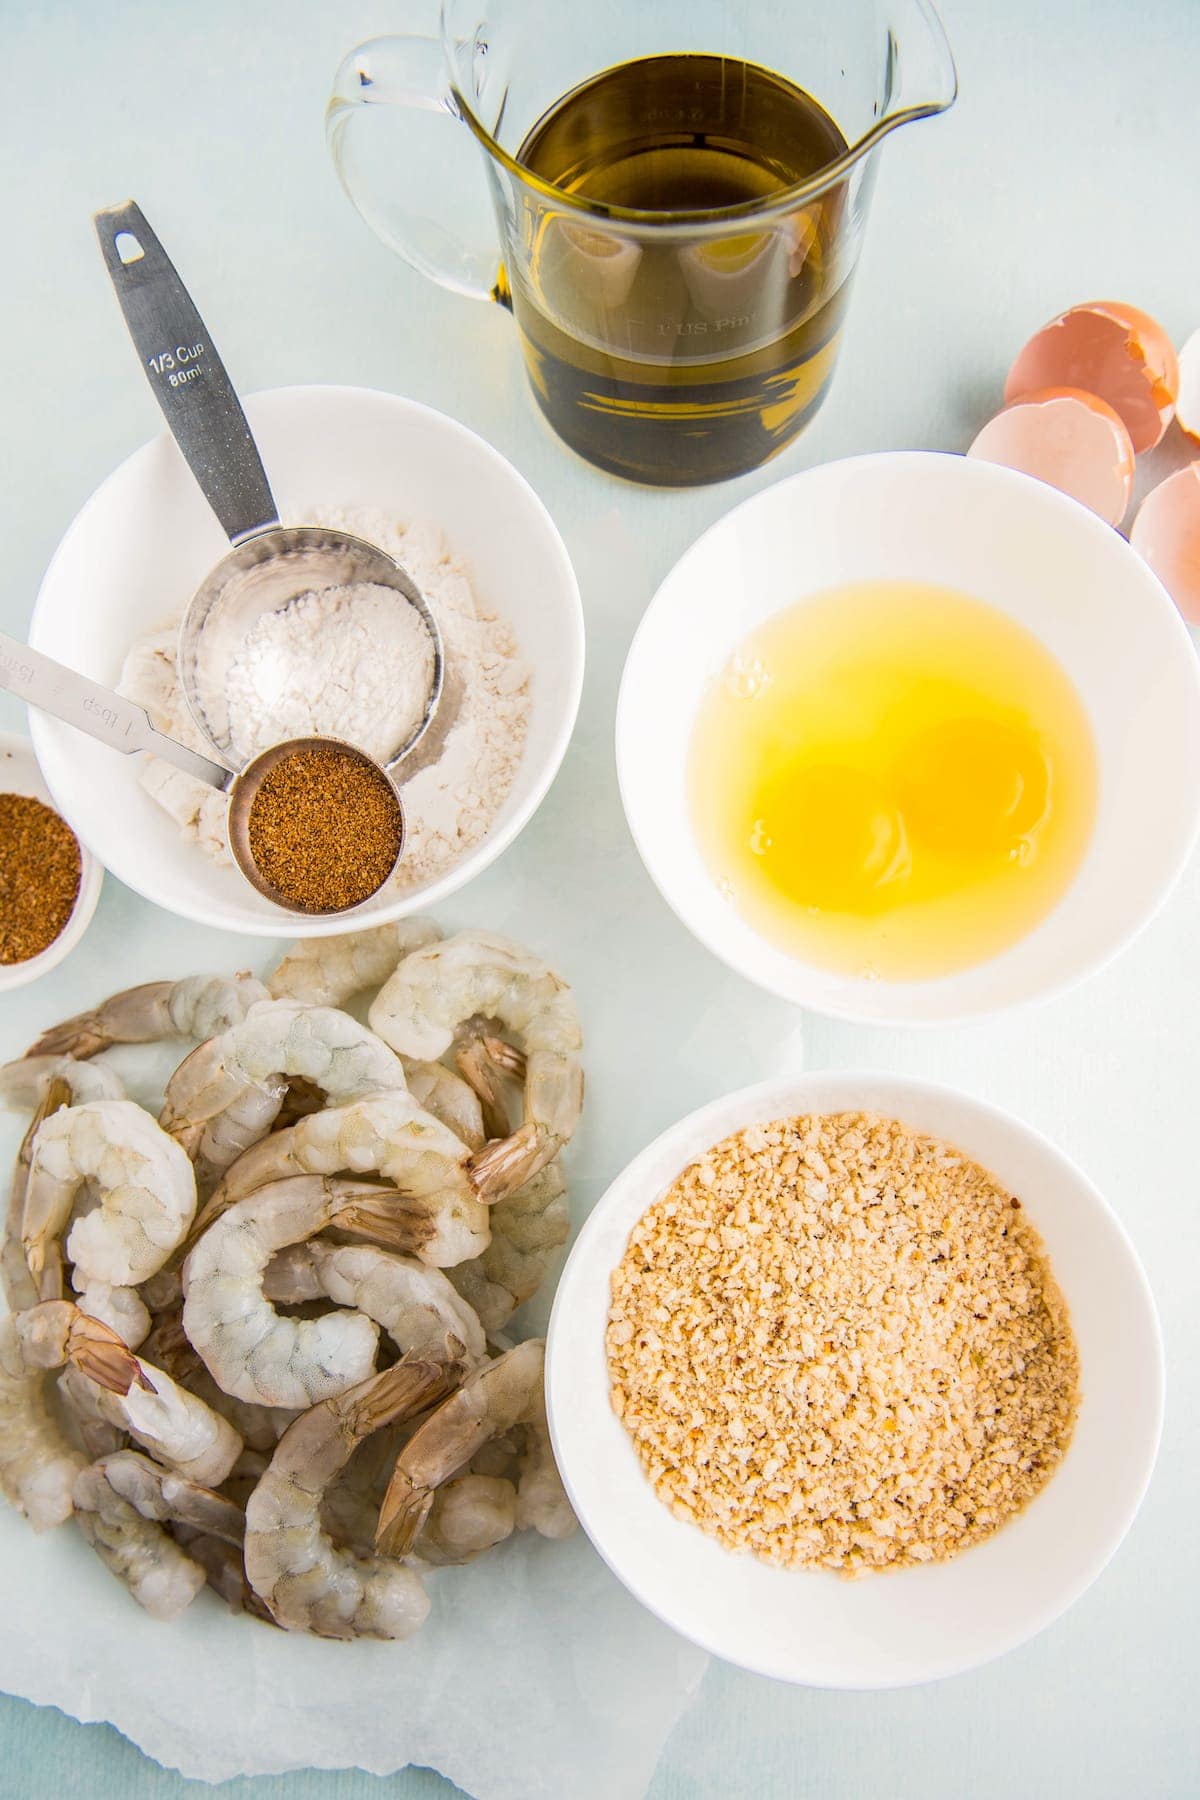 Ingredients in bowls and raw shrimp on parchment paper.